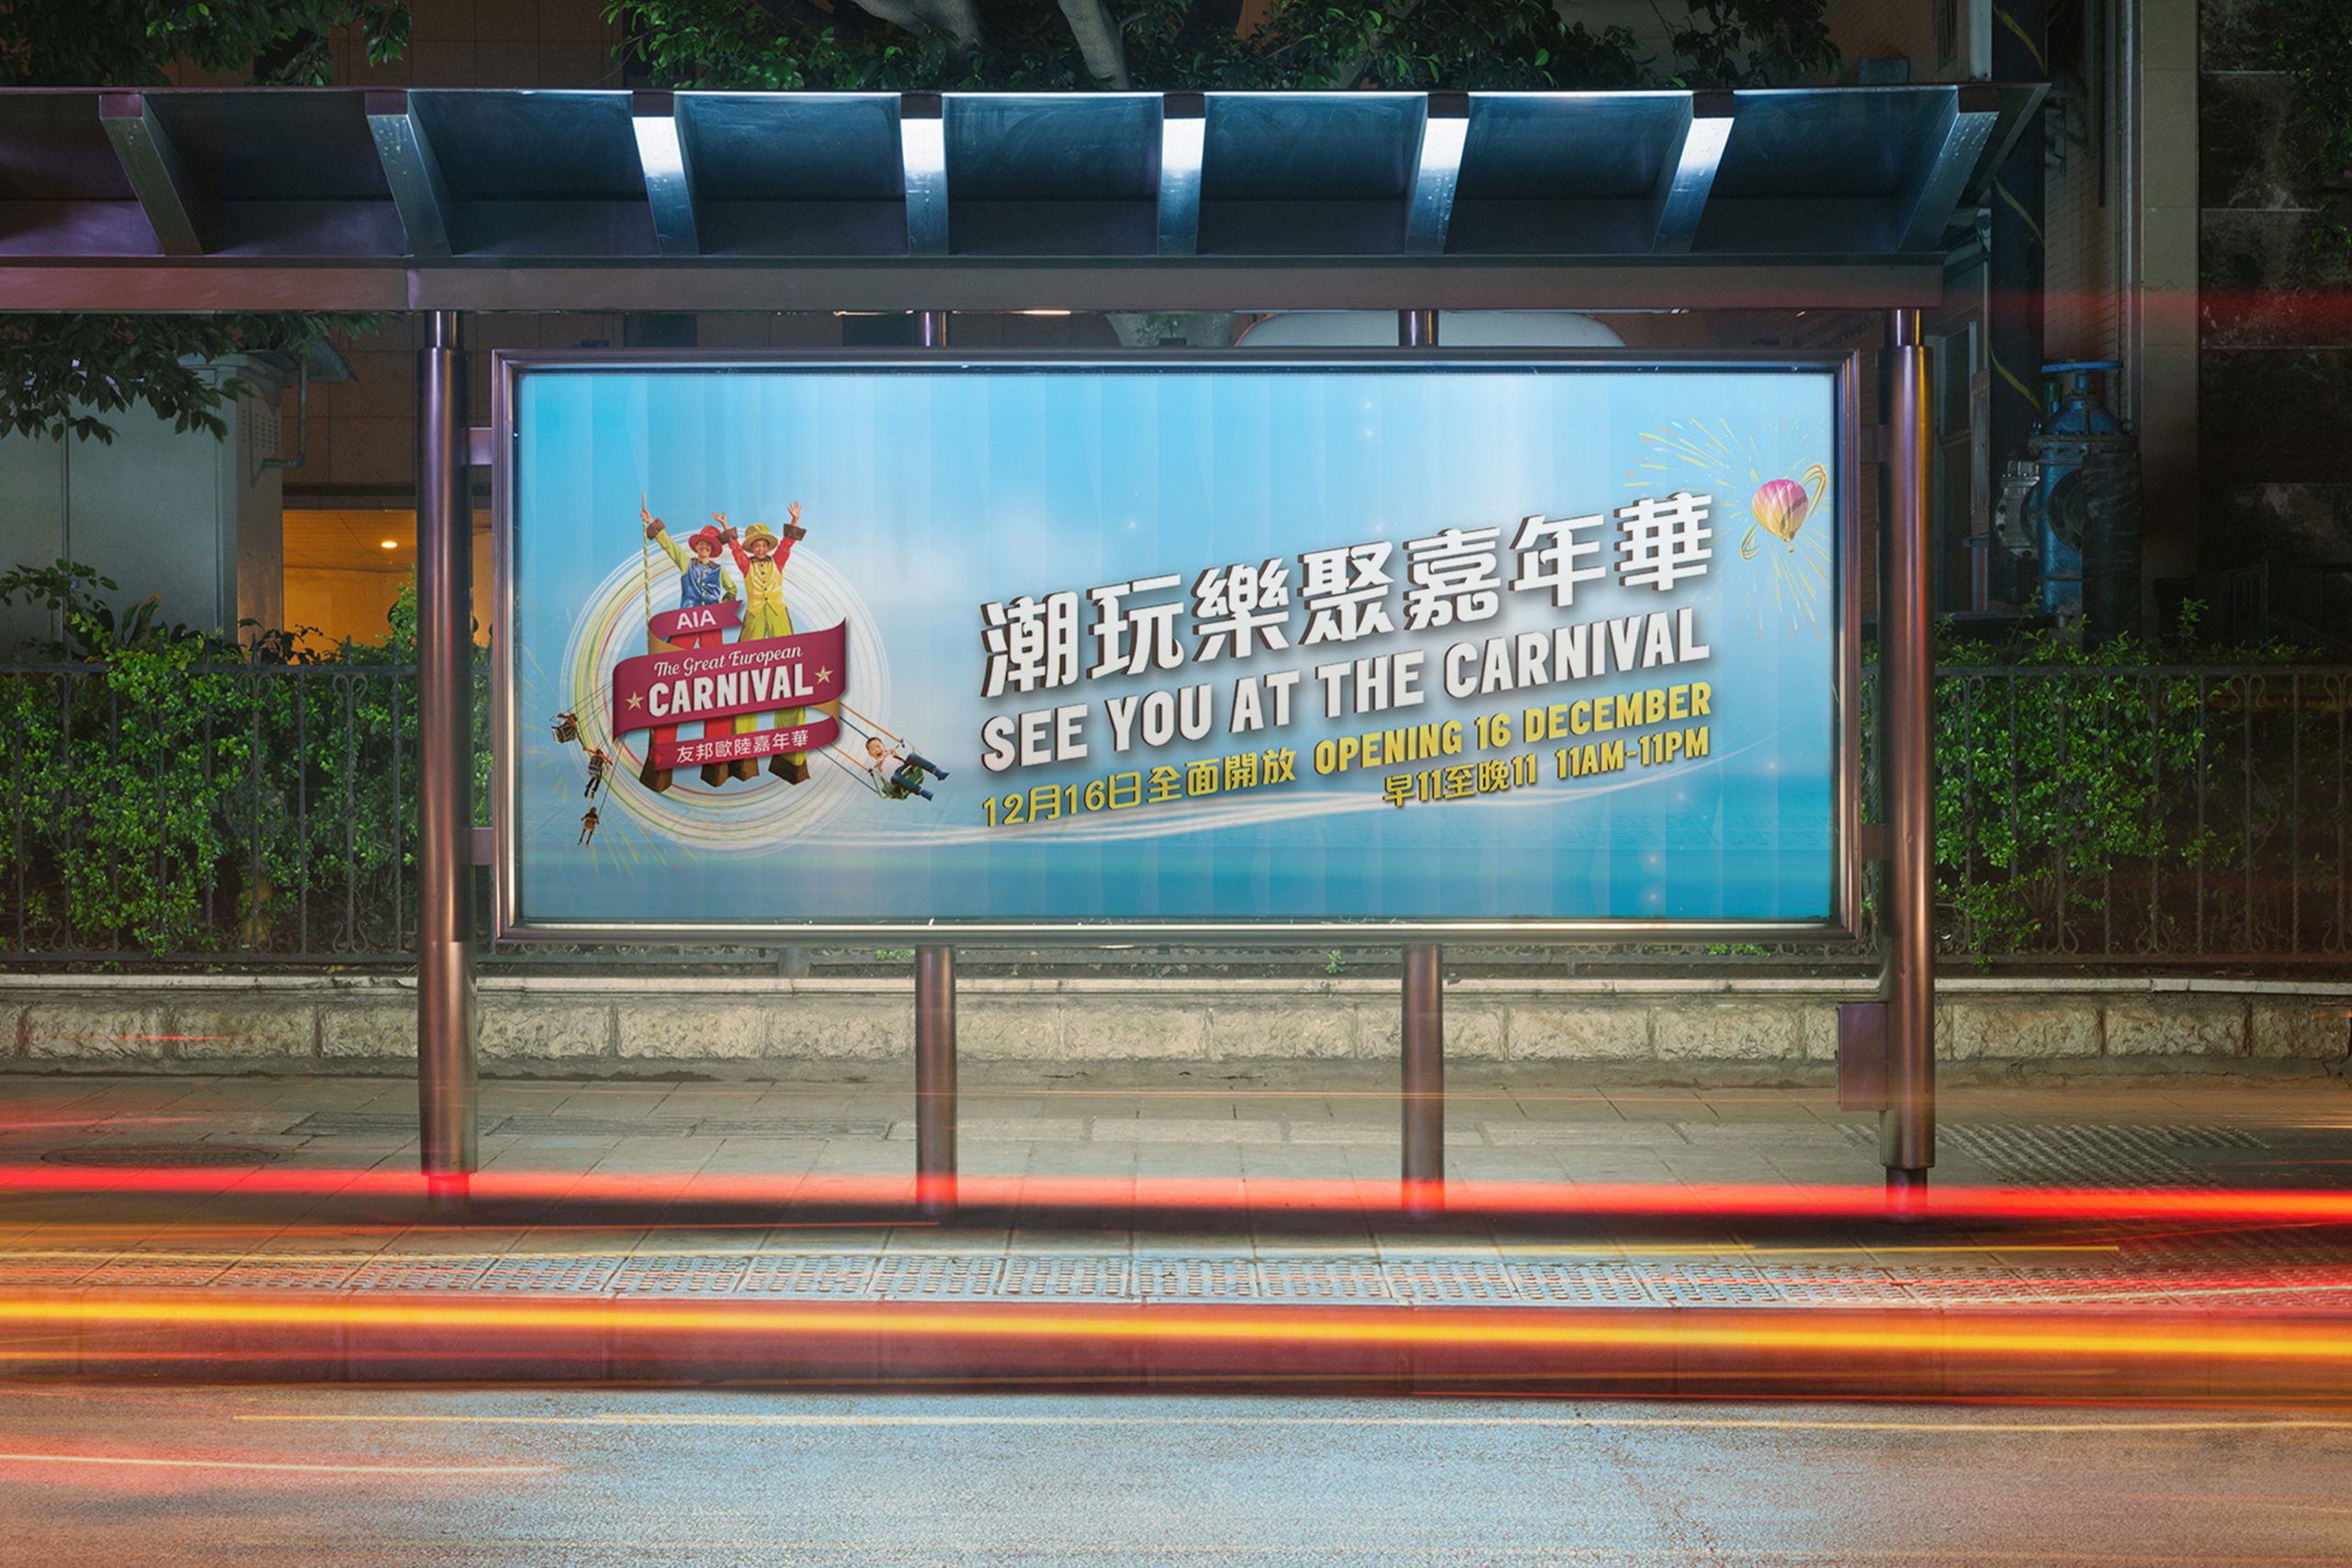 AIA Carnival Hong Kong Landscape Poster Design in bus stop